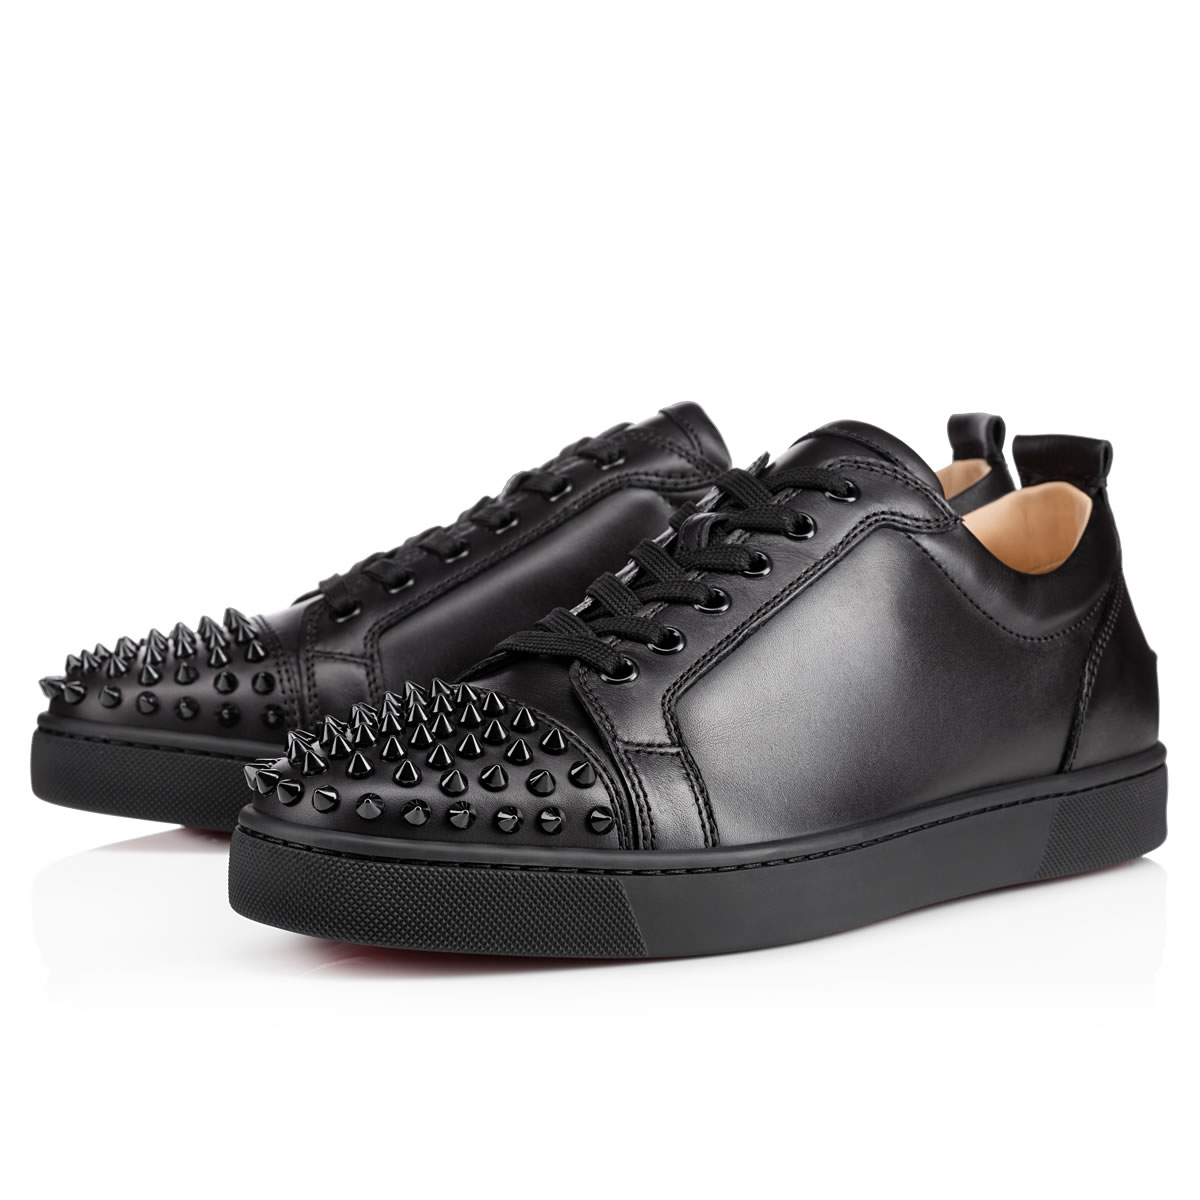 black spike shoes with red bottoms